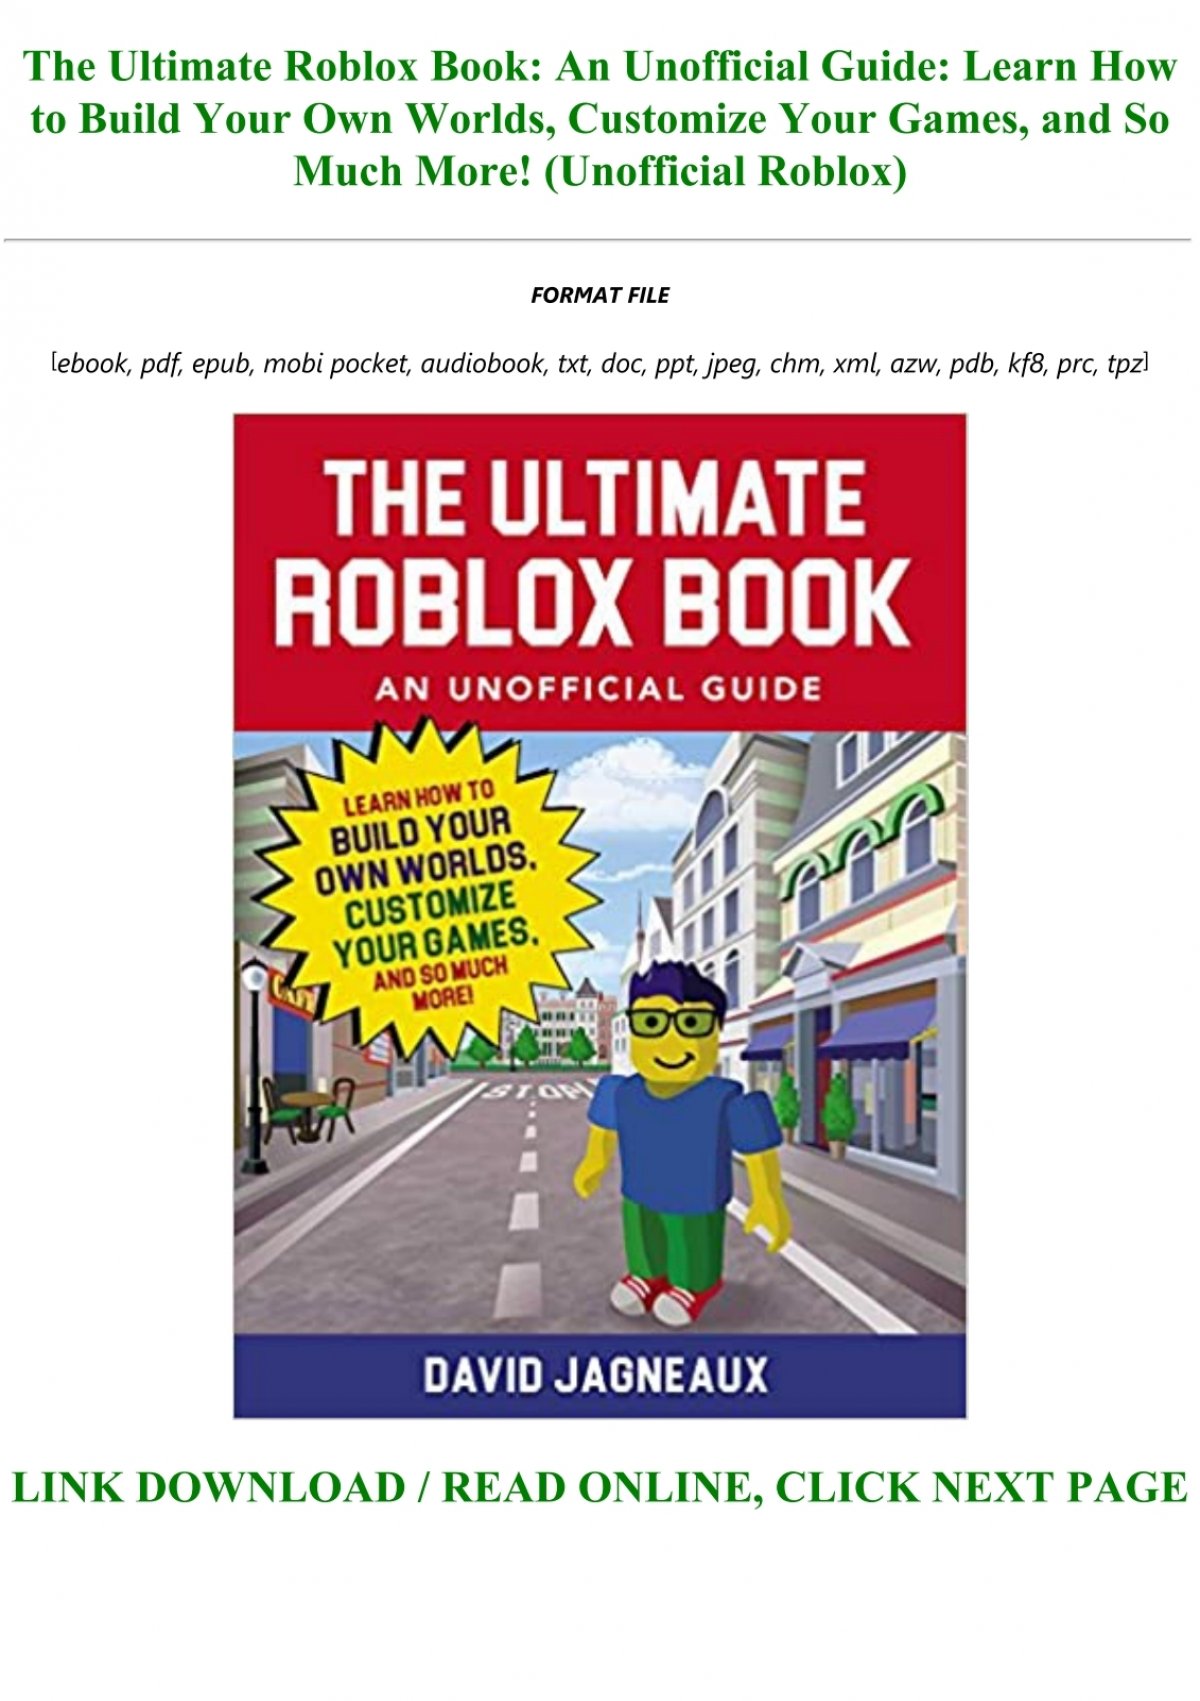 P D F Download The Ultimate Roblox Book An Unofficial Guide Learn How To Build Your Own Worlds Customize Your Games And So Much More Unofficial Roblox Full Pdf - roblox ultimate build download